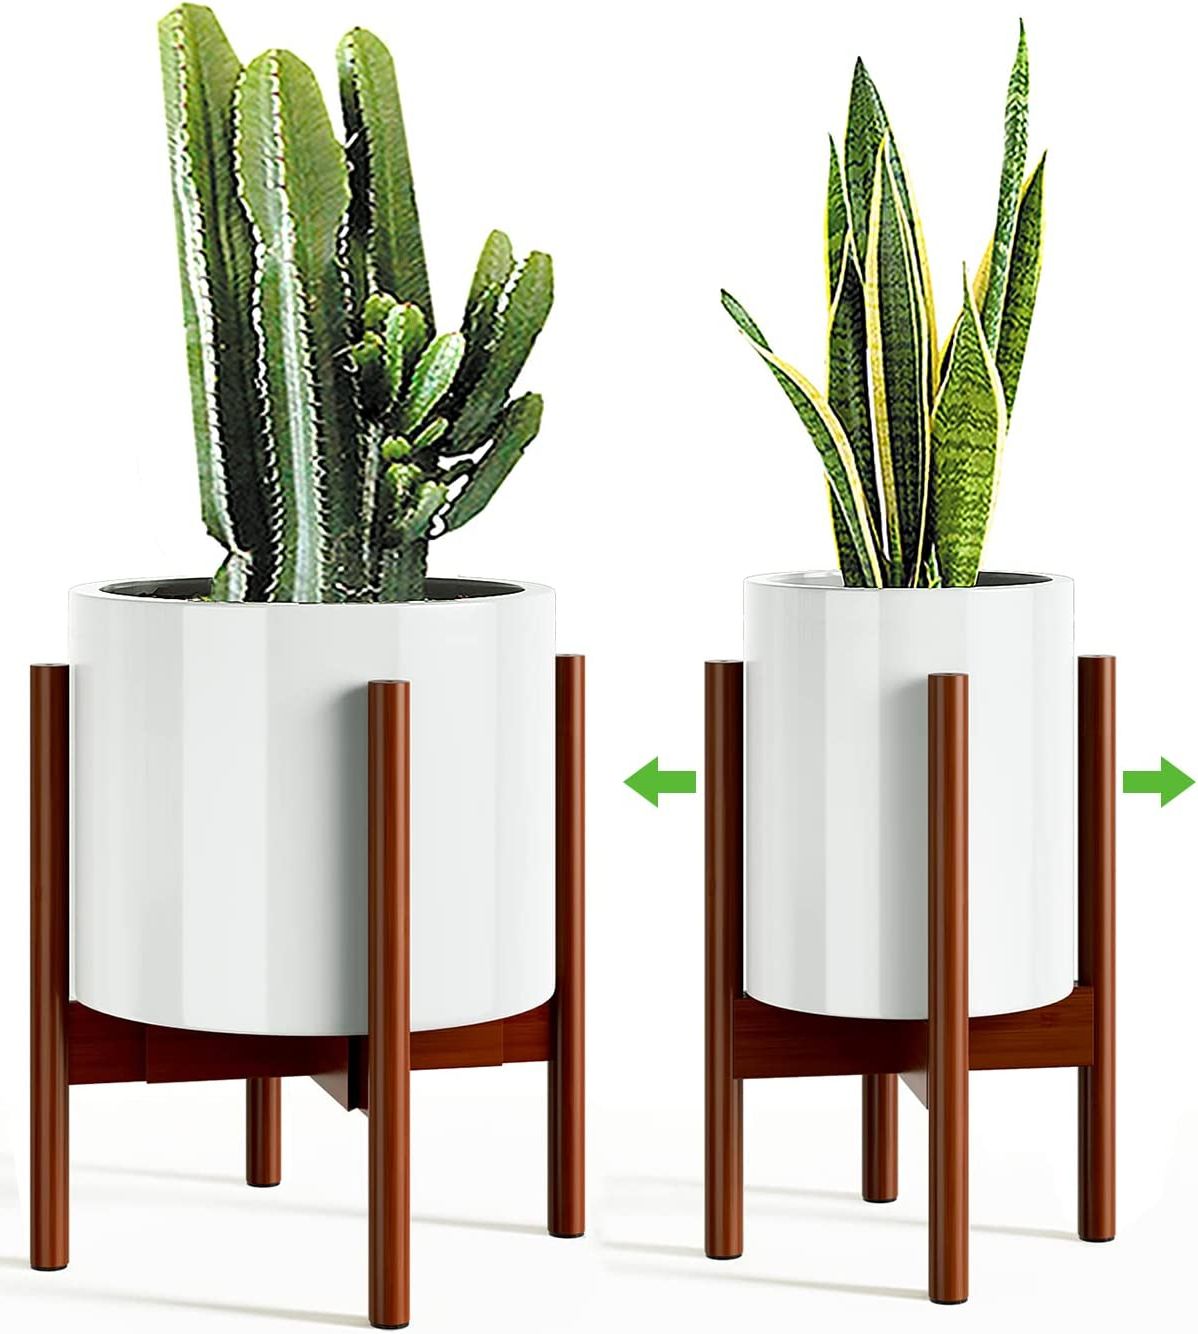 Most Recent Buy Mudeela Adjustable Plant Stand 8 To 12 Inches, Bamboo Mid Century  Modern Plant Stand 15 Inches In Height, Indoor Plant Stand, Fit 8 9 10 11  12 Inch Pots Pot & With 15 Inch Plant Stands (View 2 of 15)